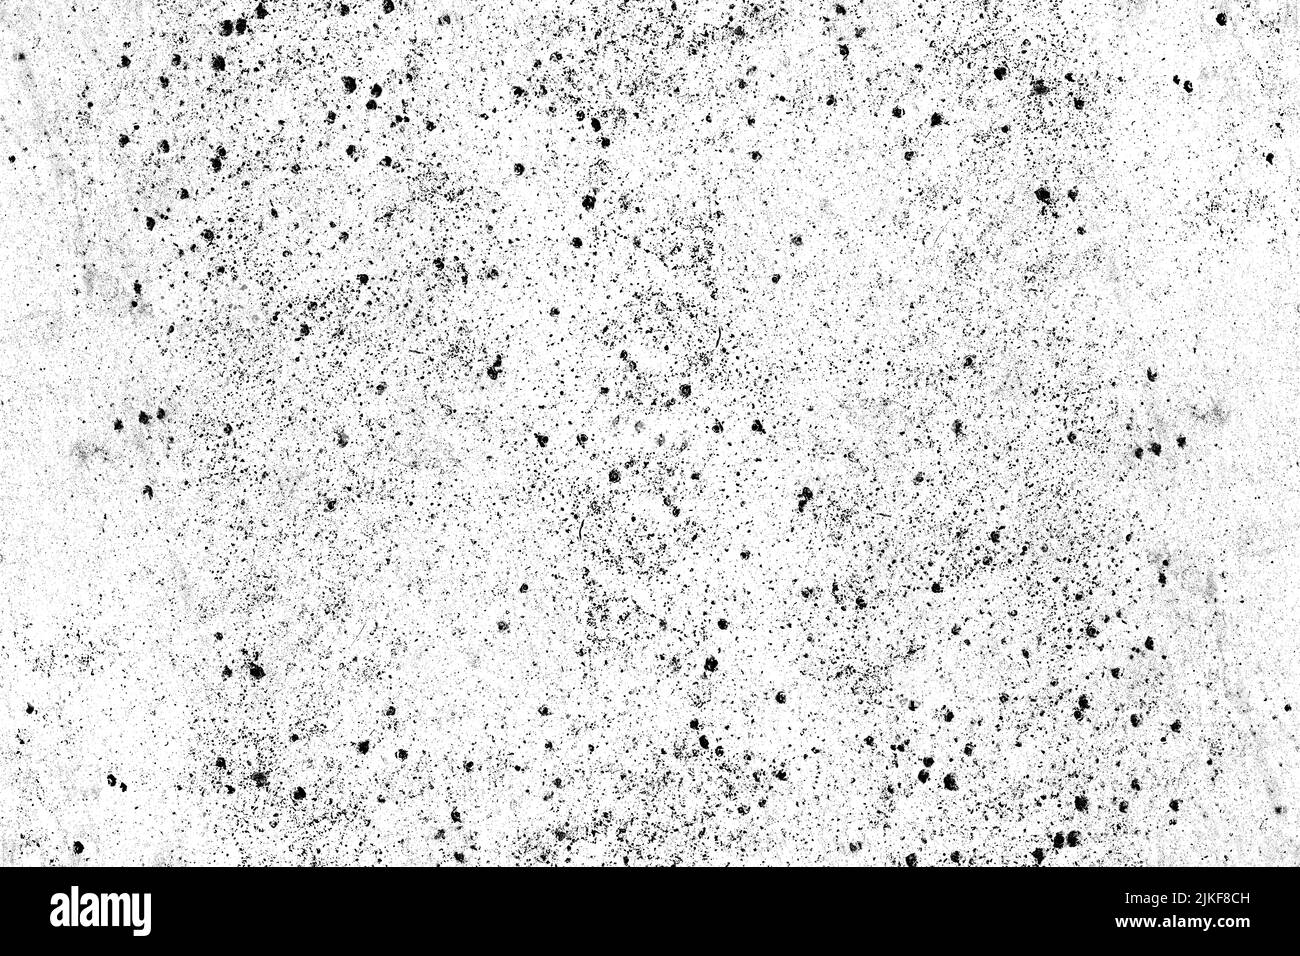 Seamless scattered grunge texture on white metal sheet Stock Photo